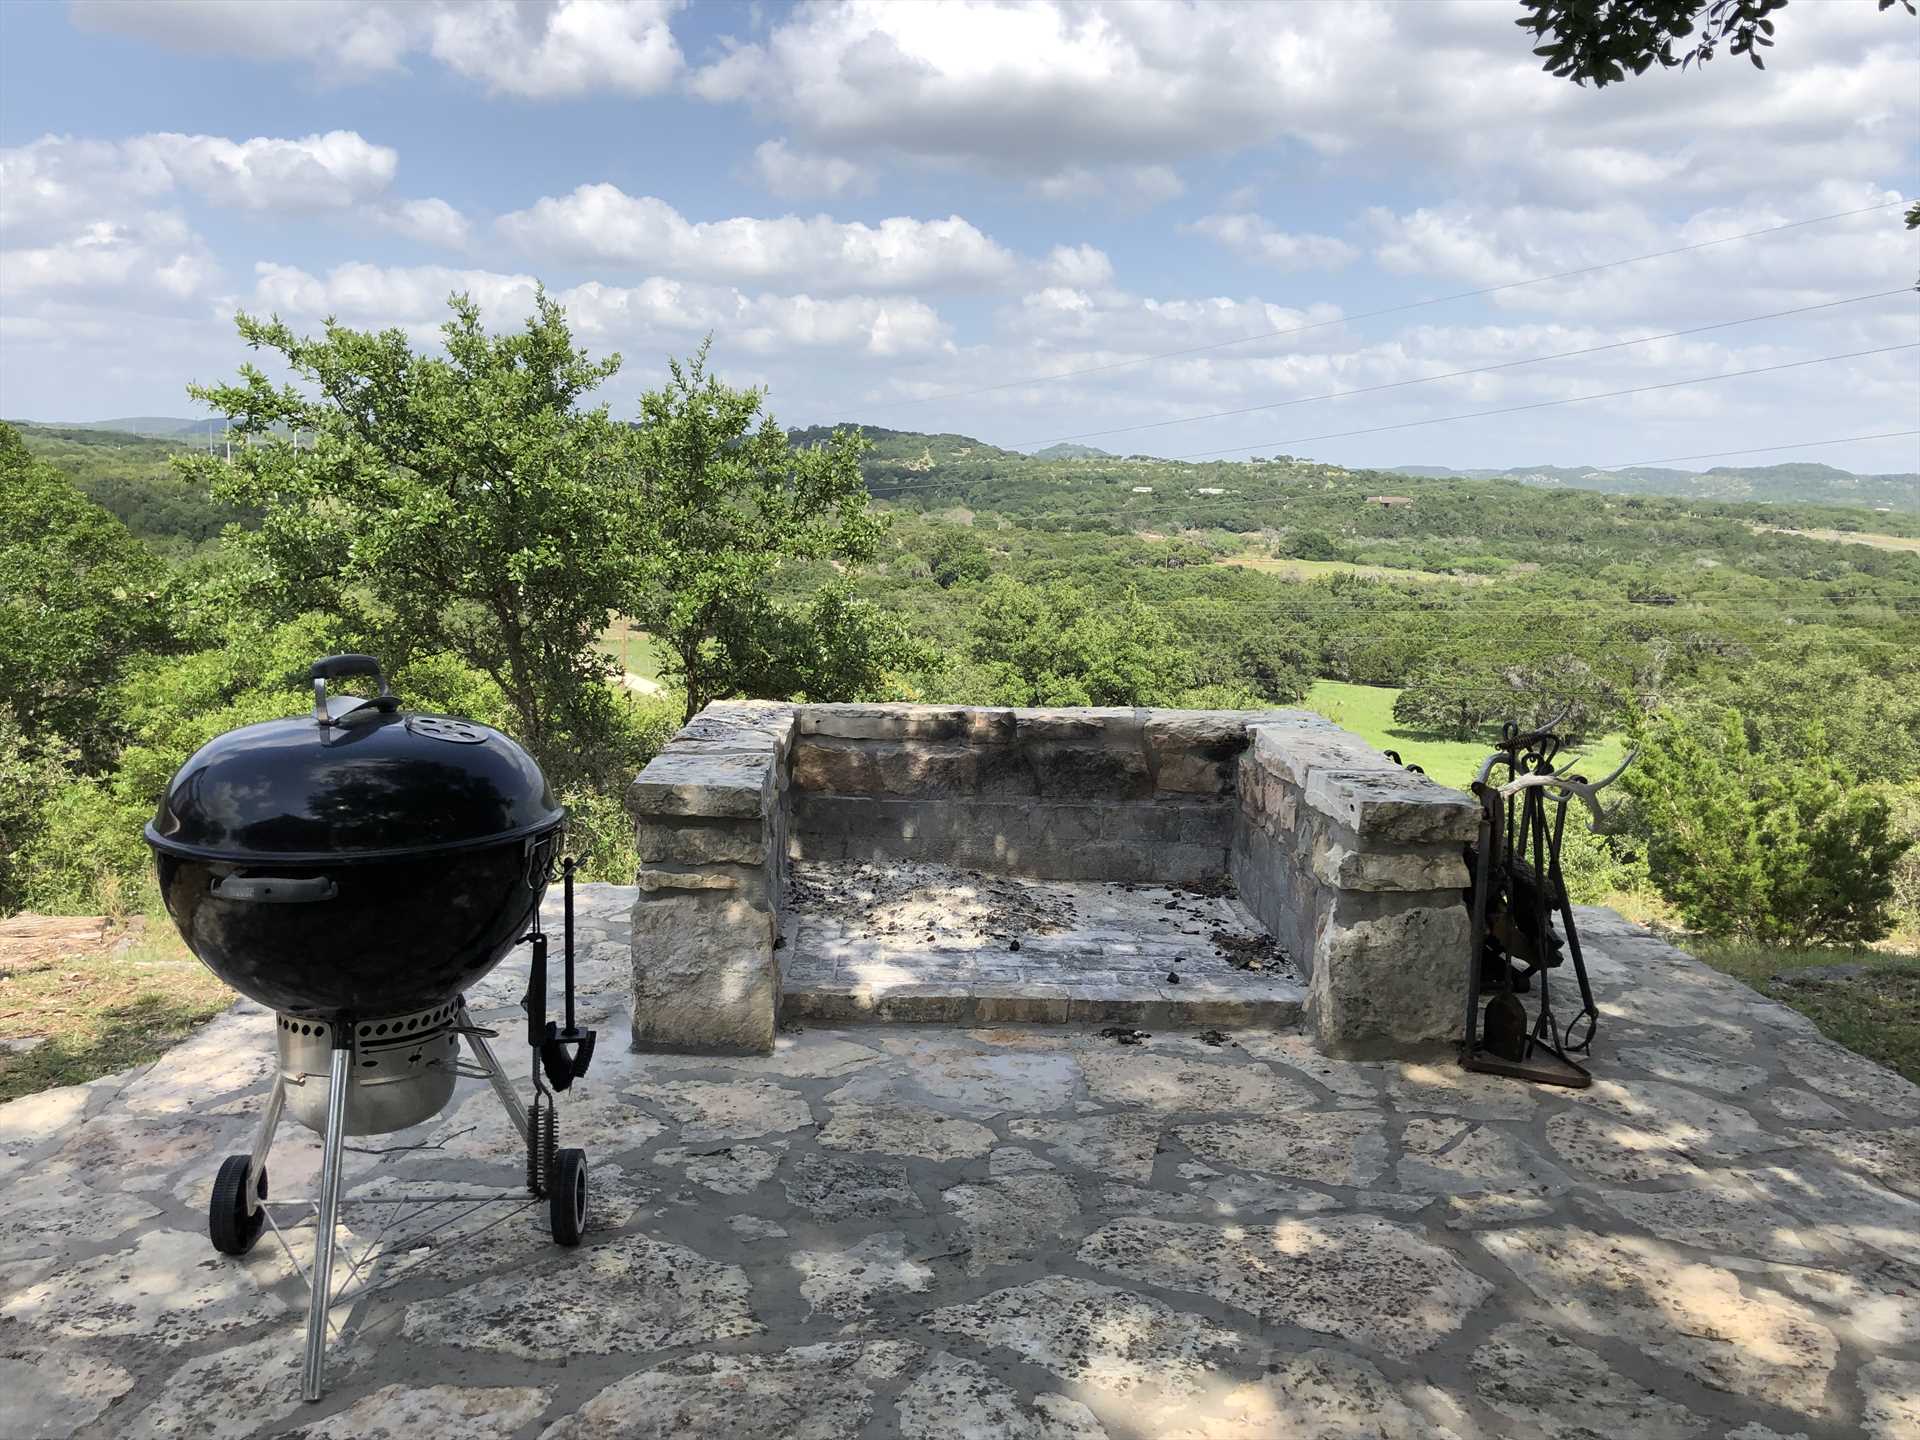                                                 Keep your eyes on your steaks and s'mores as you take advantage of the charcoal grill and fire pit. We know the lofty view can be distracting!